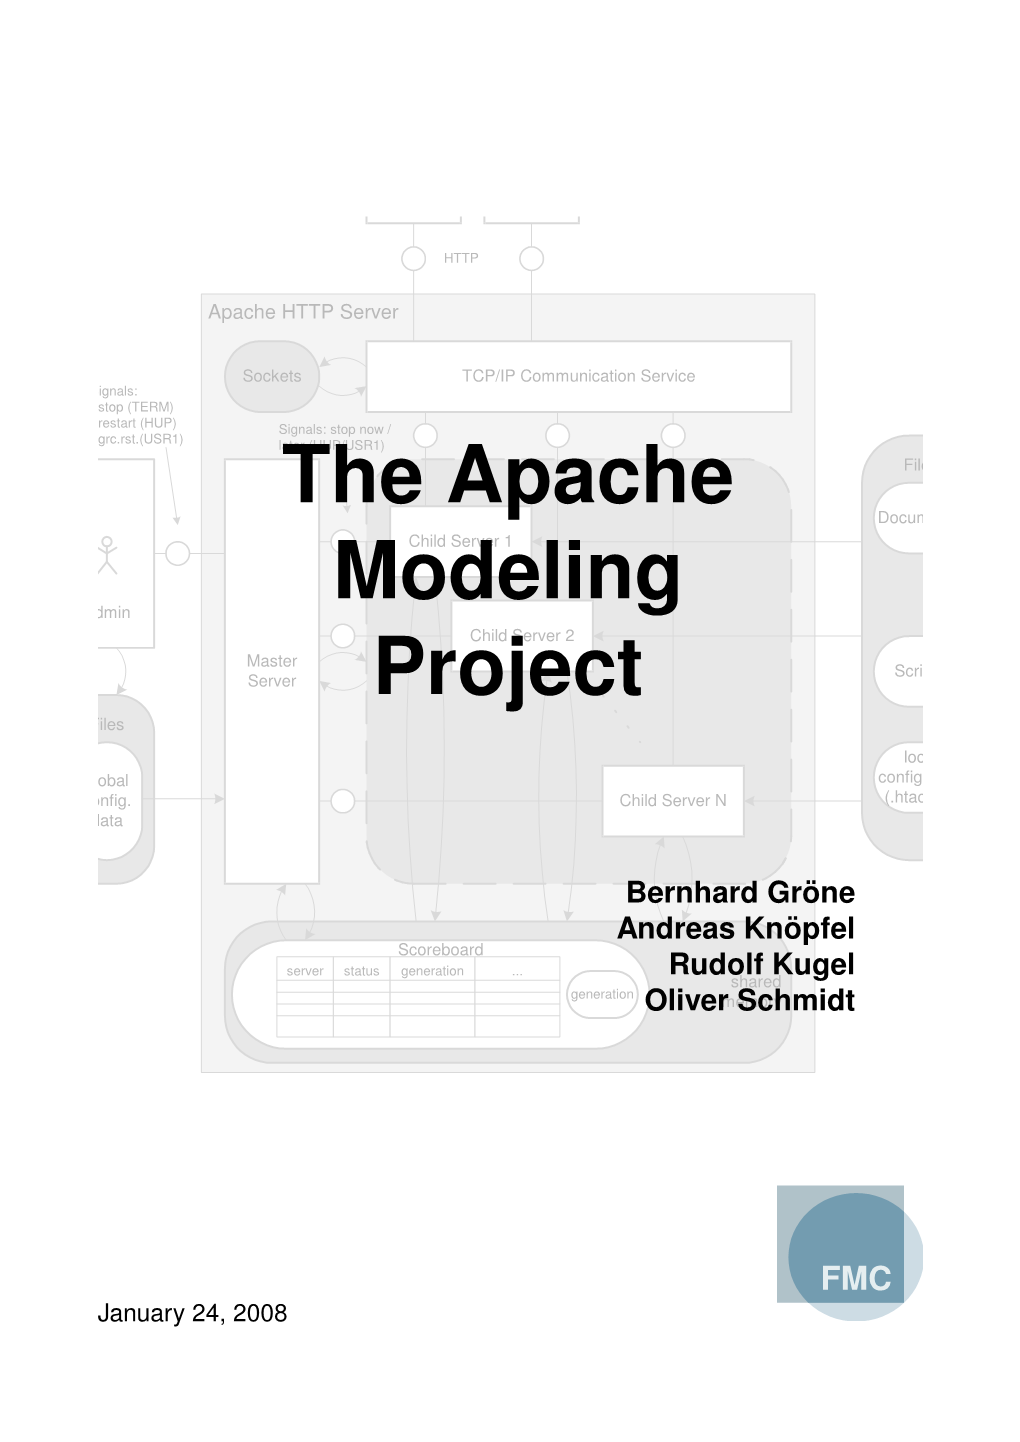 The Apache Modeling Project